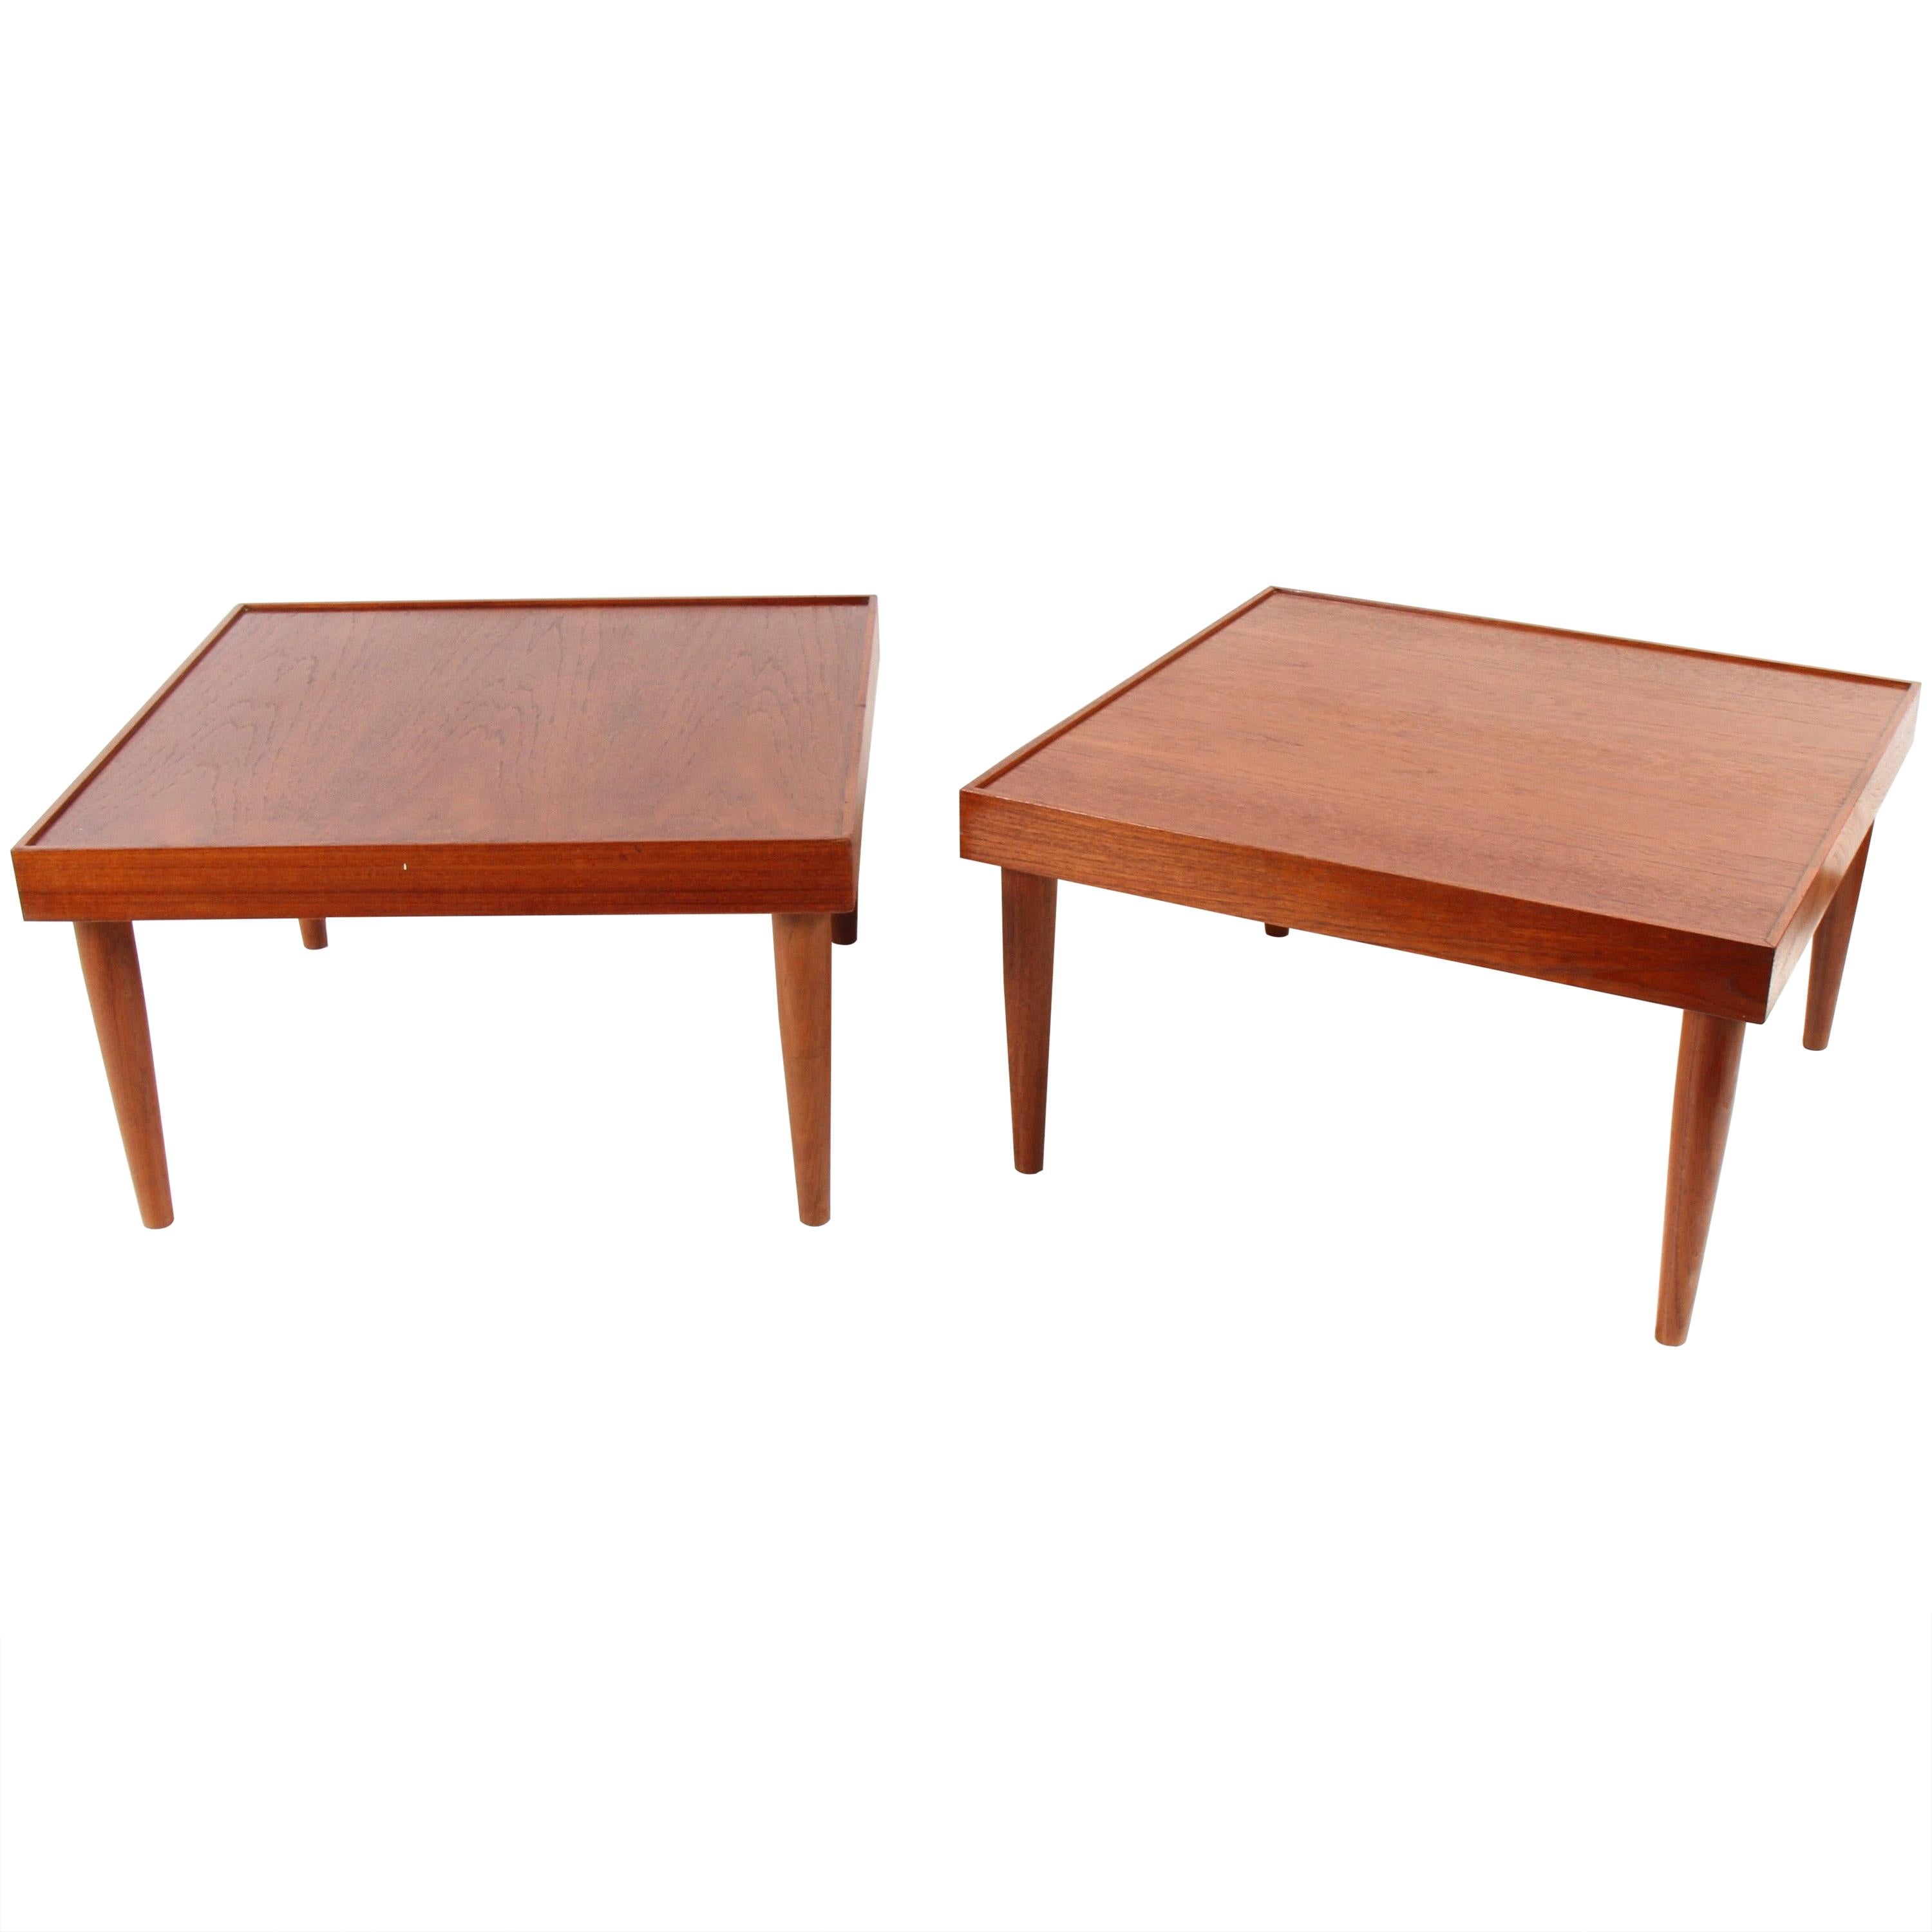 Midcentury Teak End Tables from Norway For Sale